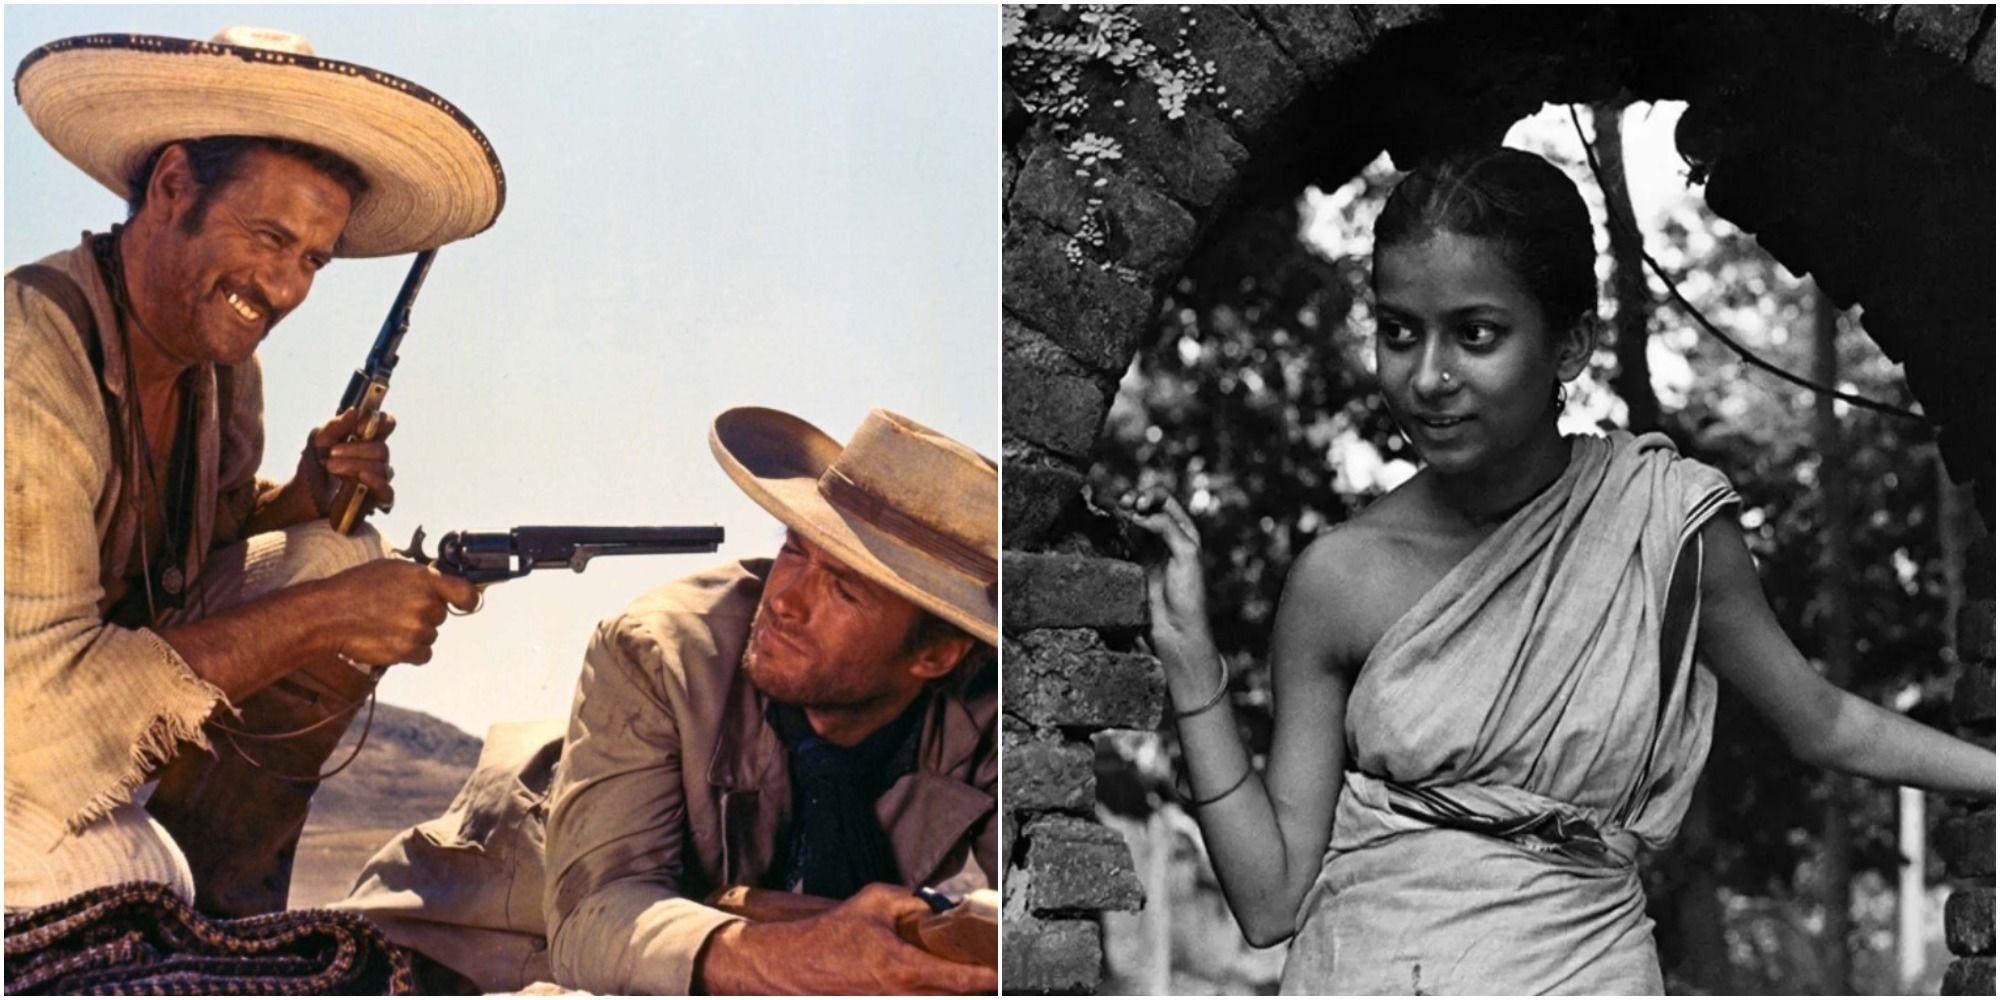 Split Image showing stills from TGTBTU and Pather Panchali